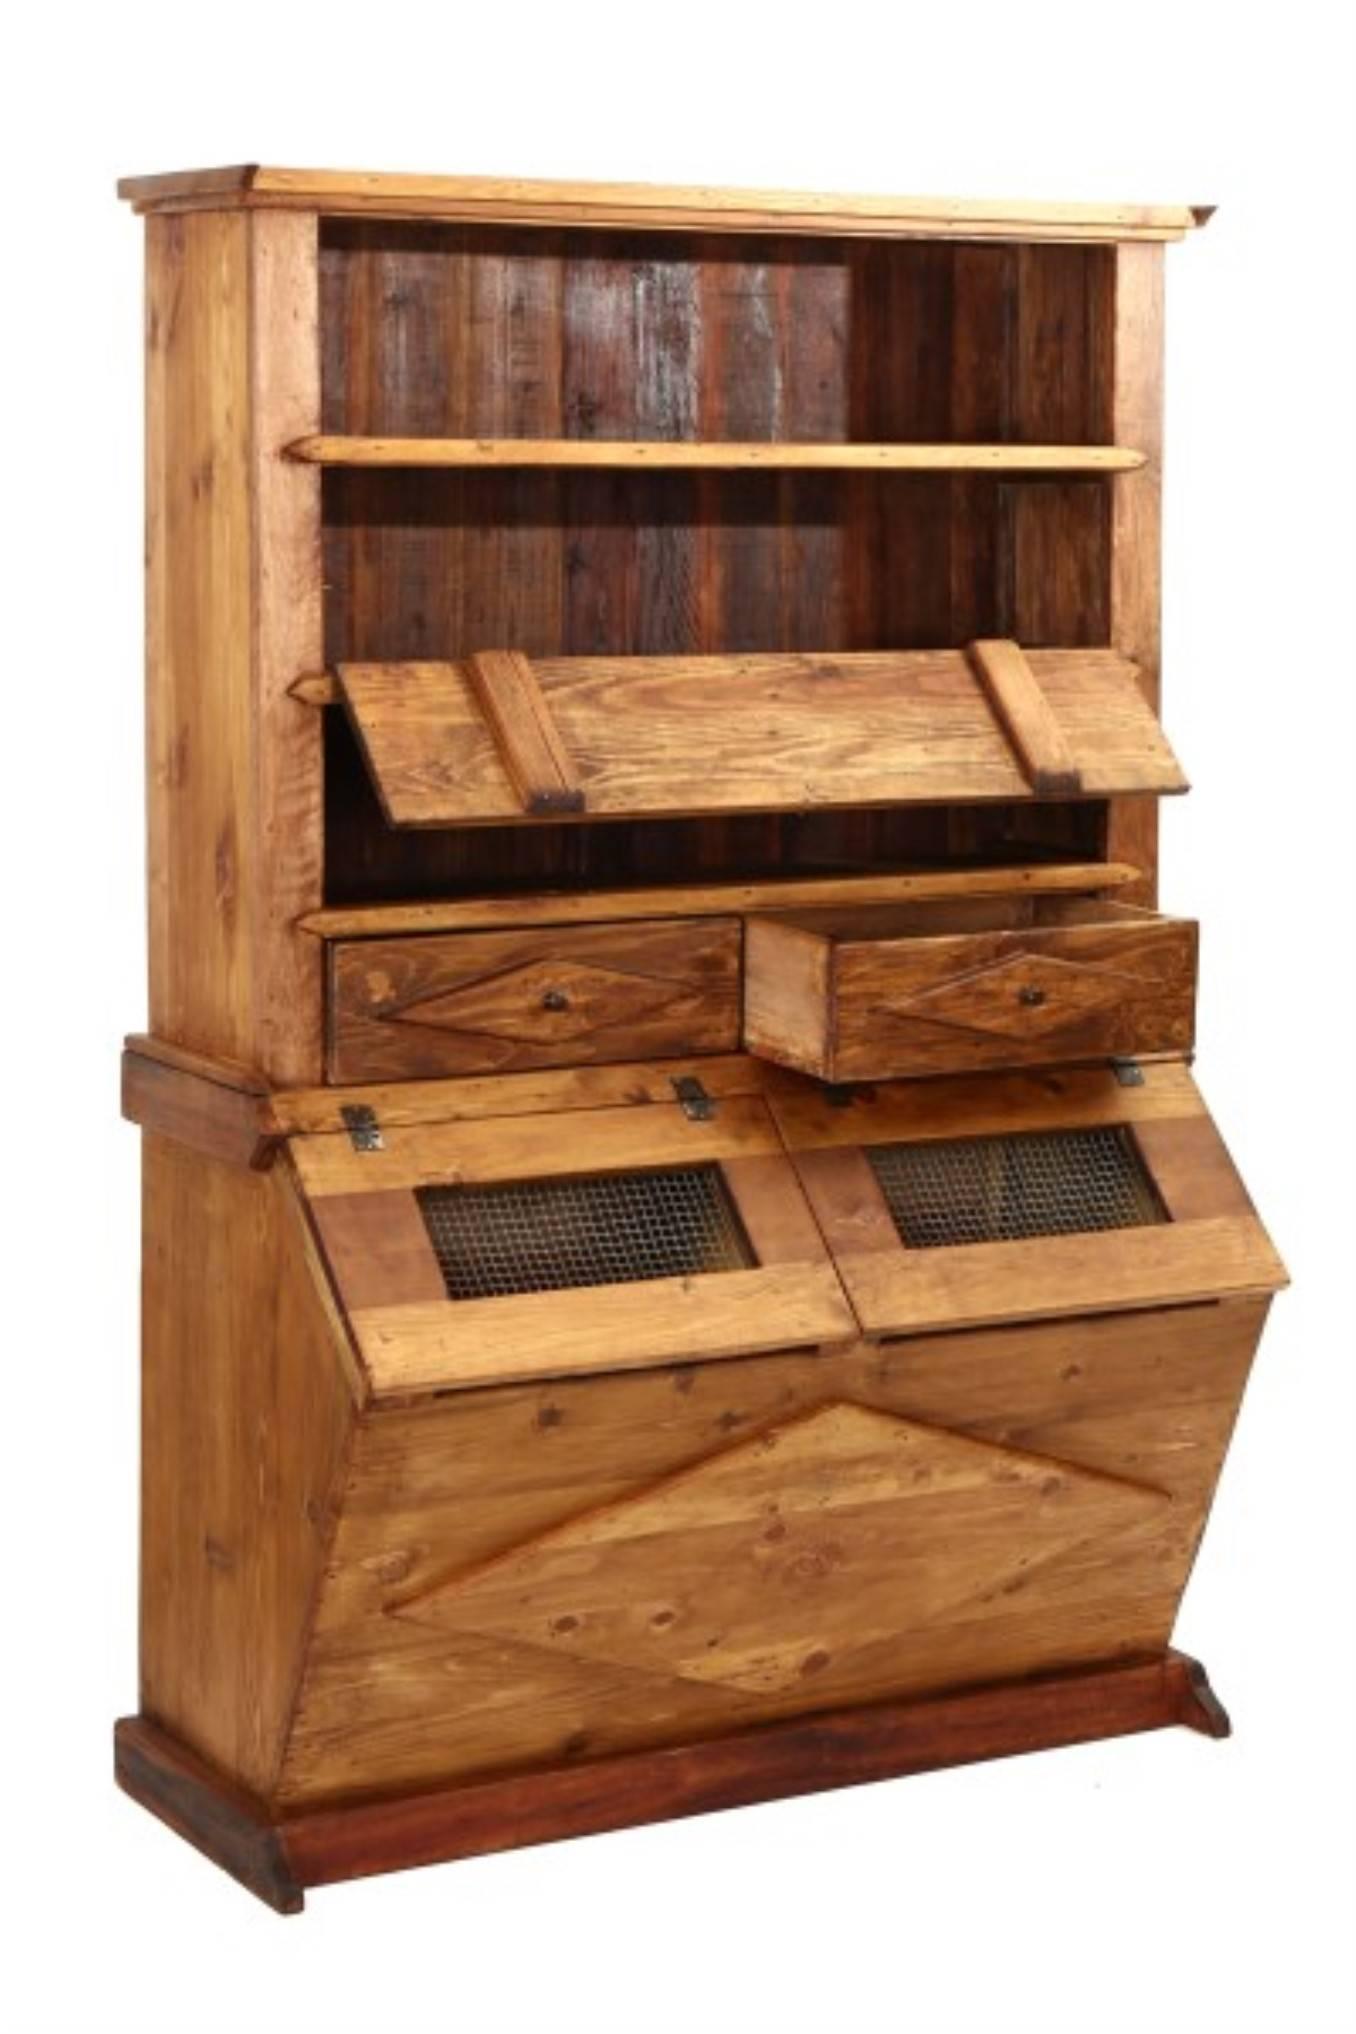 Portuguese old drugstore cabinet., with 2 drawers for cereals in the bottom